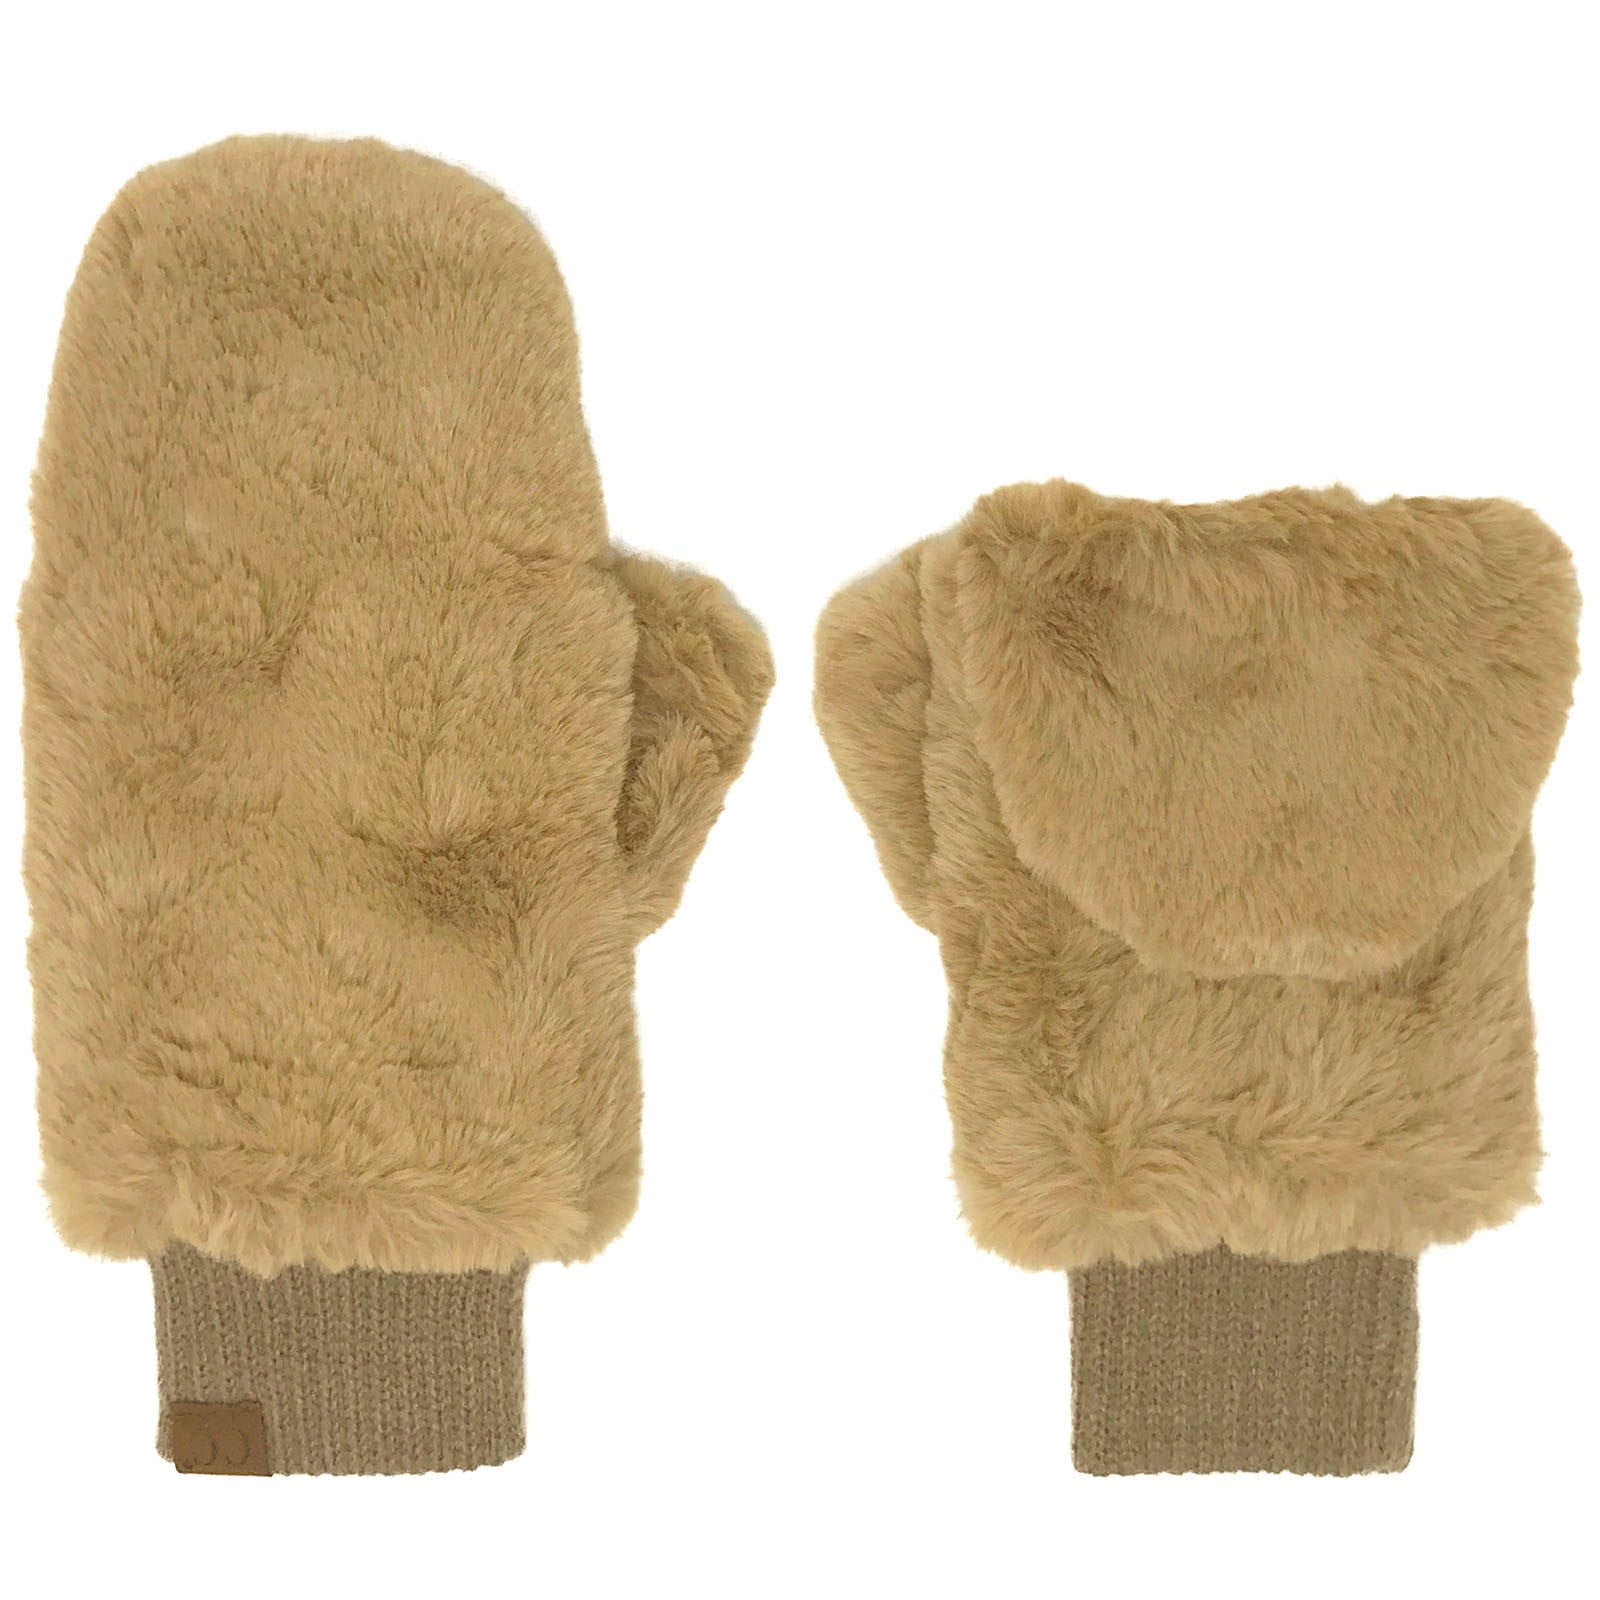 Kids Cute Fur Warm Furry Winter Mittens Magic Stretch Knit Cold Weather Outdoor Fuzzy Gloves 